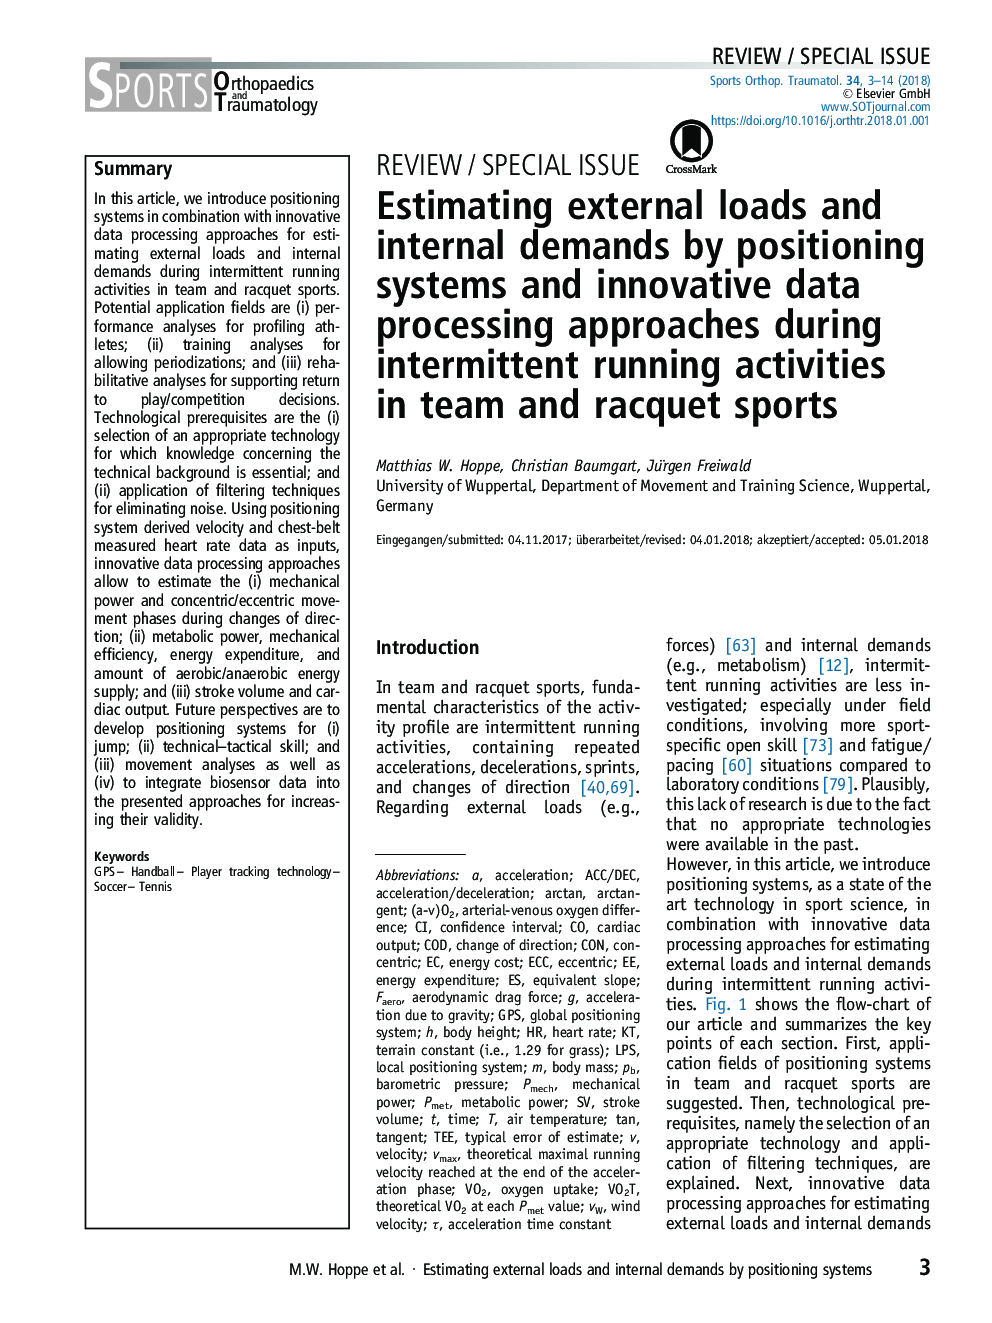 Estimating external loads and internal demands by positioning systems and innovative data processing approaches during intermittent running activities in team and racquet sports